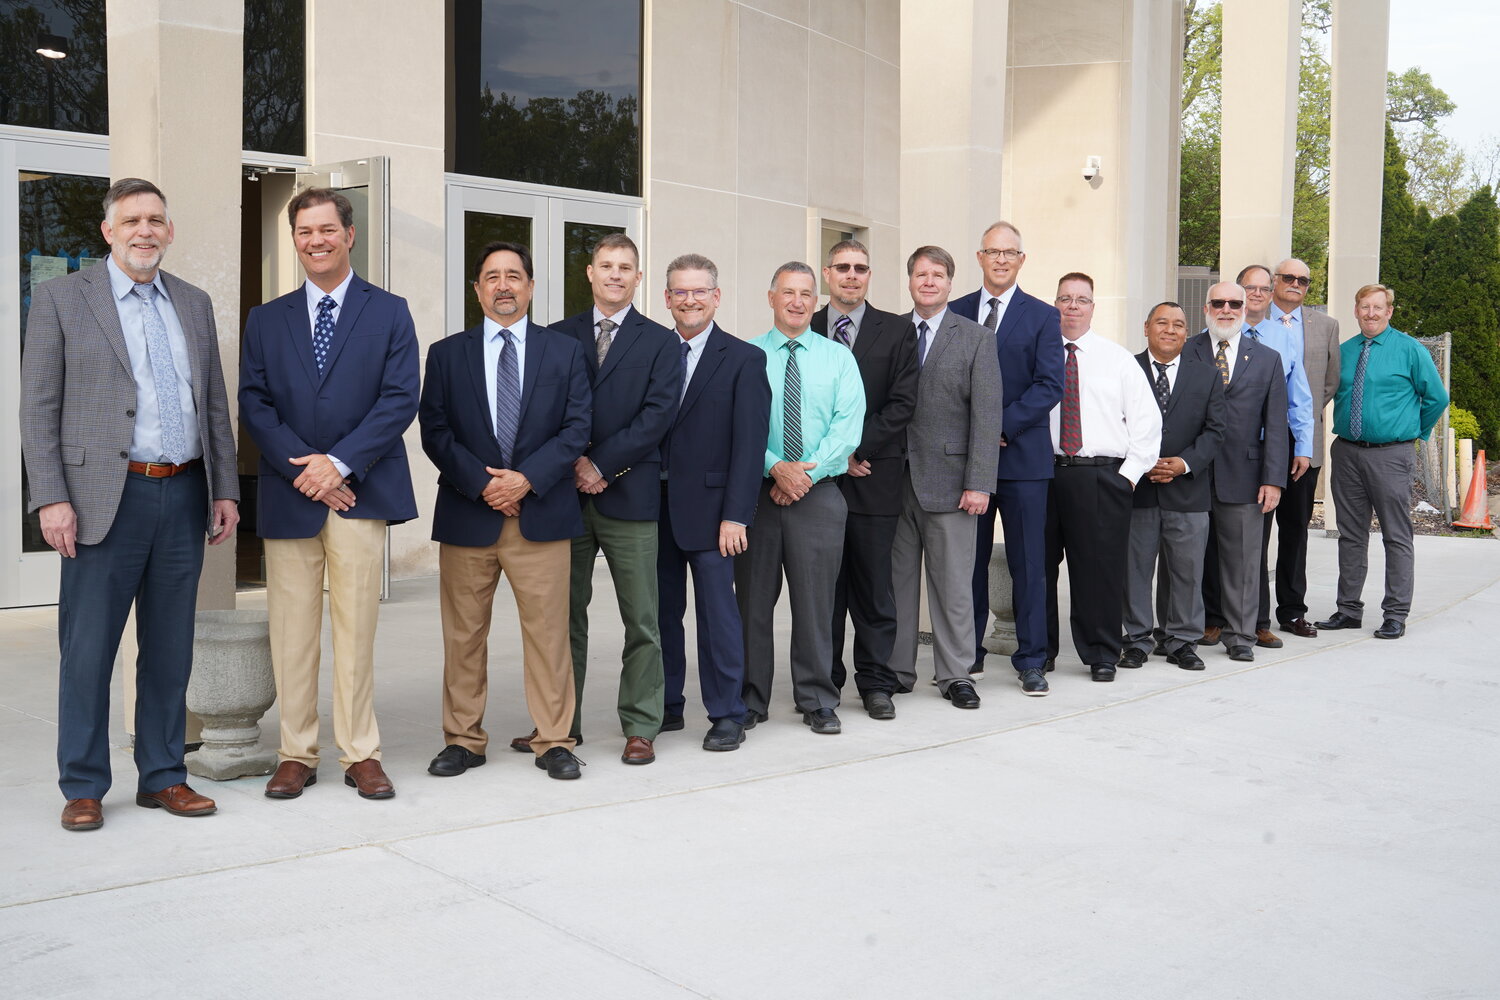 Edward Galbraith, Louie Delk, Charles Ochoa, Harvey Million Jr, Robert Czarnecki, Michael Dorrell, Chad Freie, Kenneth Arthur, Keith Henke, Dwayne Goodwin OFS, Osmaro de Leon, James Rangitsch Jr, Mark Oligschlaeger, Denis Gladbach and Brian Lutz gather outside the Cana Hall entrance to the Cathedral of St. Joseph April 28 before being admitted to candidacy, an important milestone in the five-year process of discernment and formation for the Diaconate.